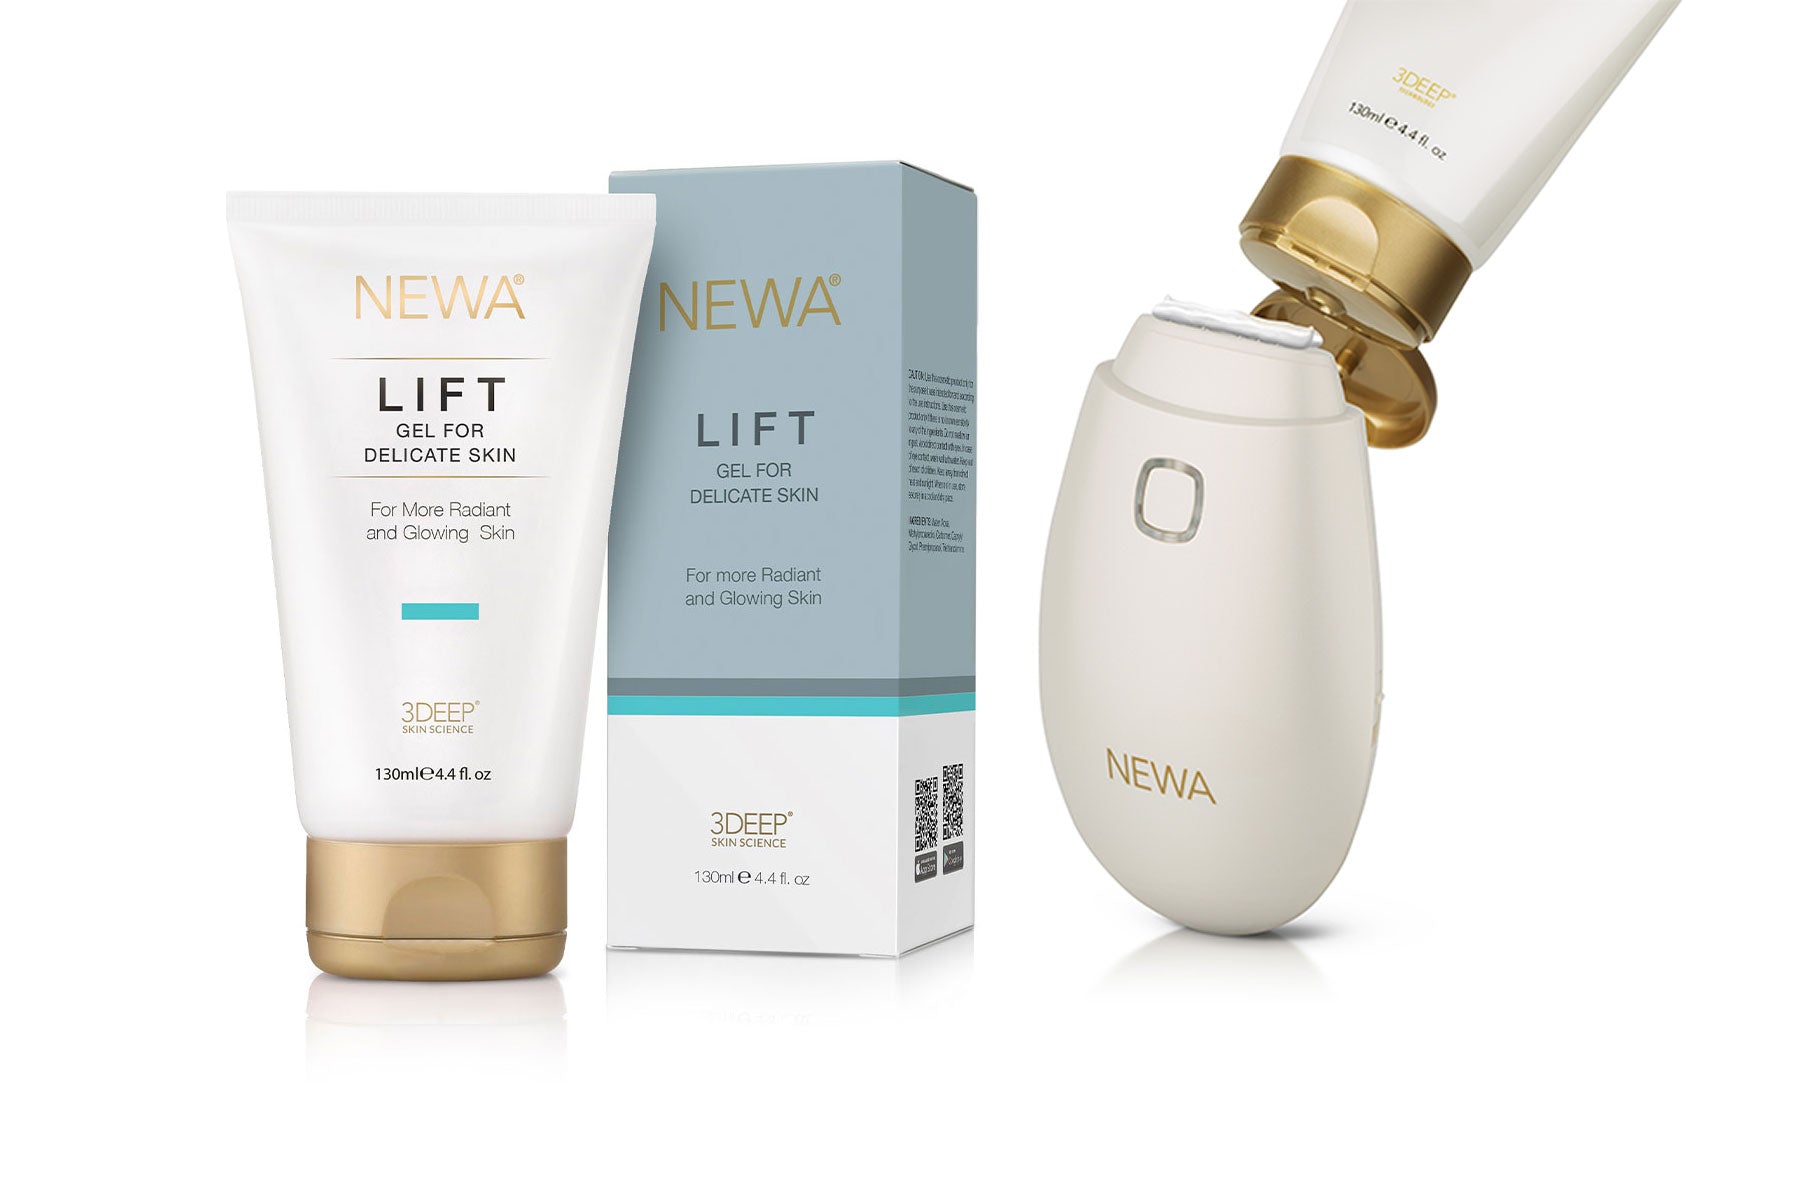 New gel launched for used alongside NEWA